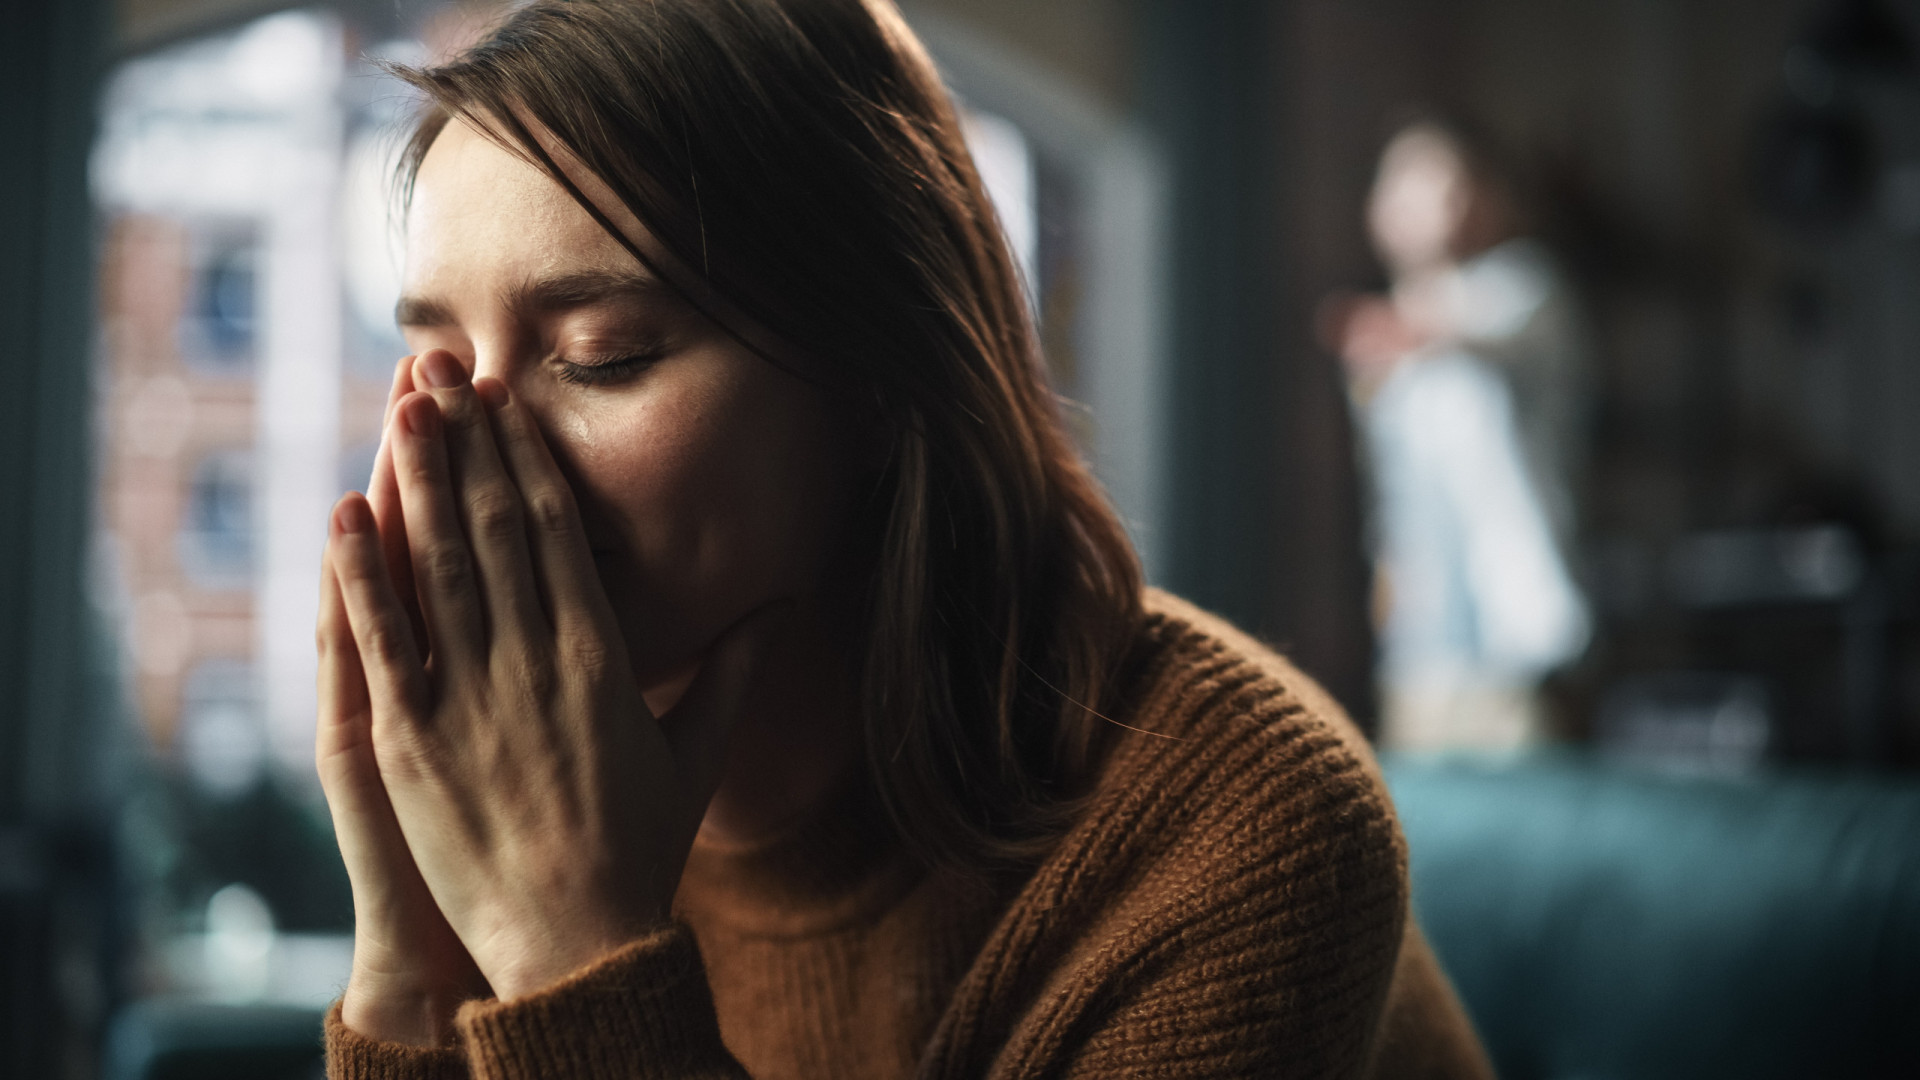 <p>Physical or emotional abuse of any kind has been linked to some people with IAD.</p><p><a href="https://www.msn.com/en-us/community/channel/vid-7xx8mnucu55yw63we9va2gwr7uihbxwc68fxqp25x6tg4ftibpra?cvid=94631541bc0f4f89bfd59158d696ad7e">Follow us and access great exclusive content every day</a></p>